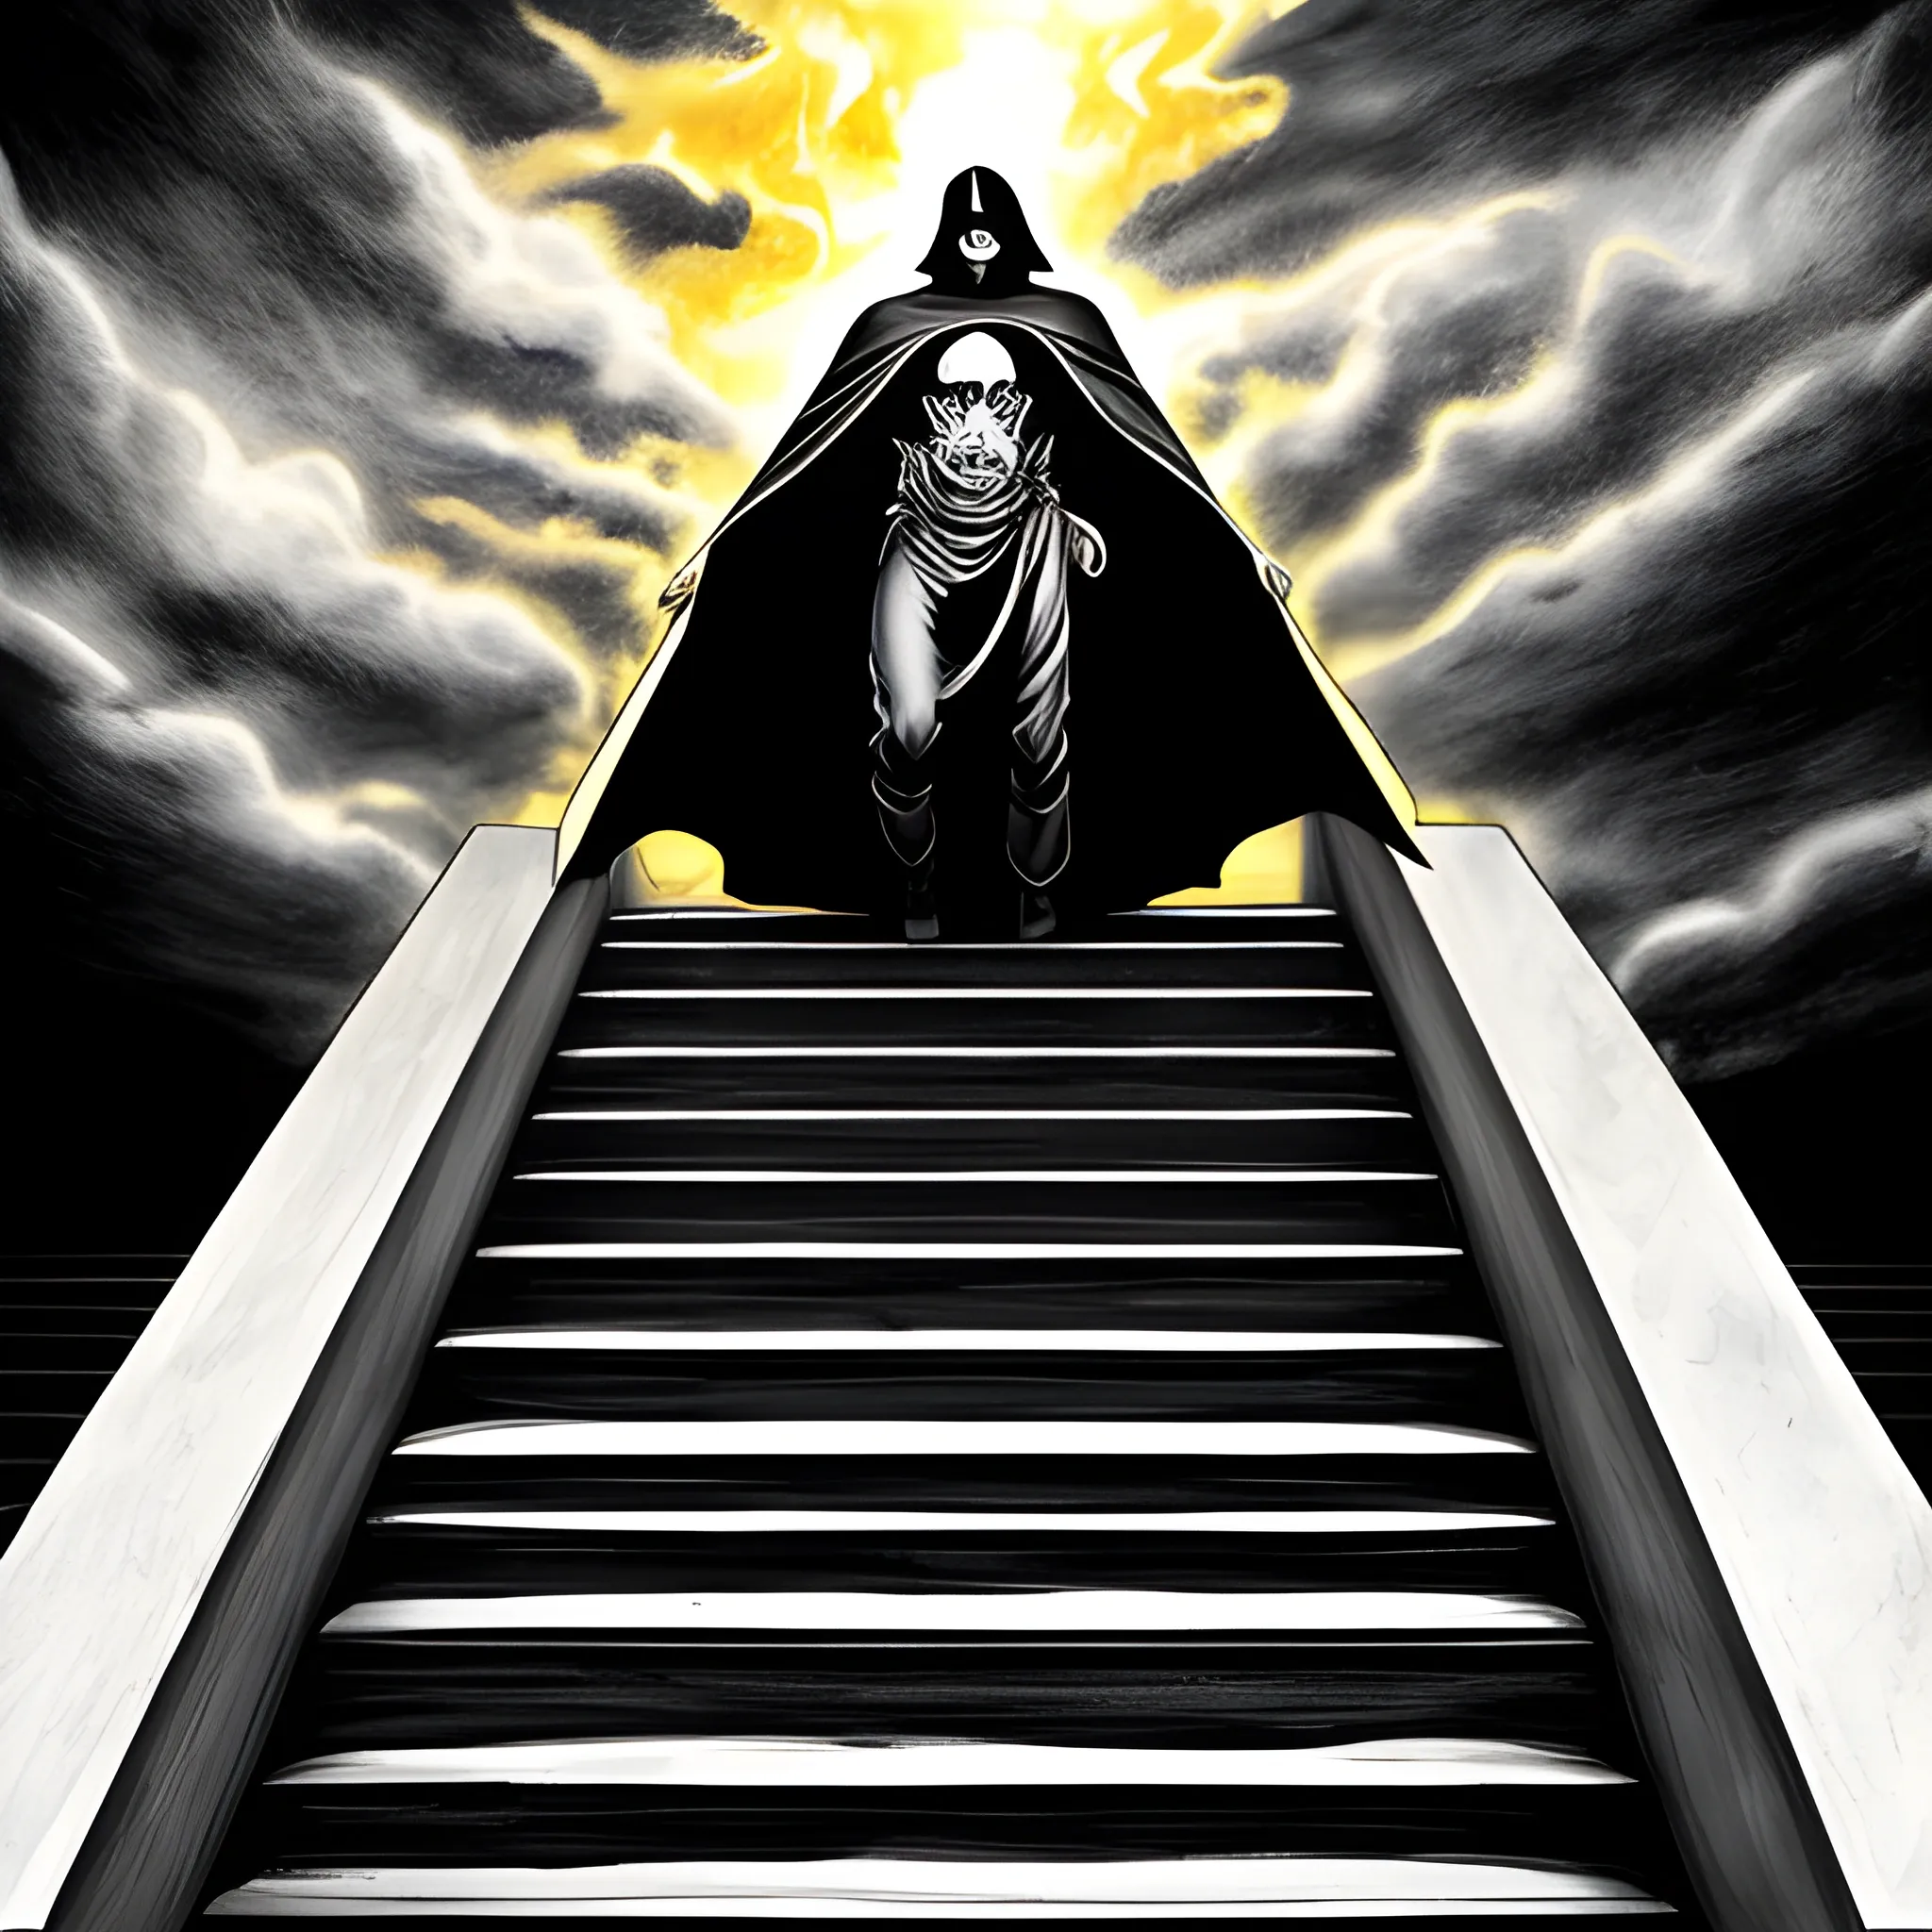 Death climbing the stairs to heaven on his back. Death has the cape and a black hood. The sky has many clouds and a flash of light, and the doors are golden. Realistic style